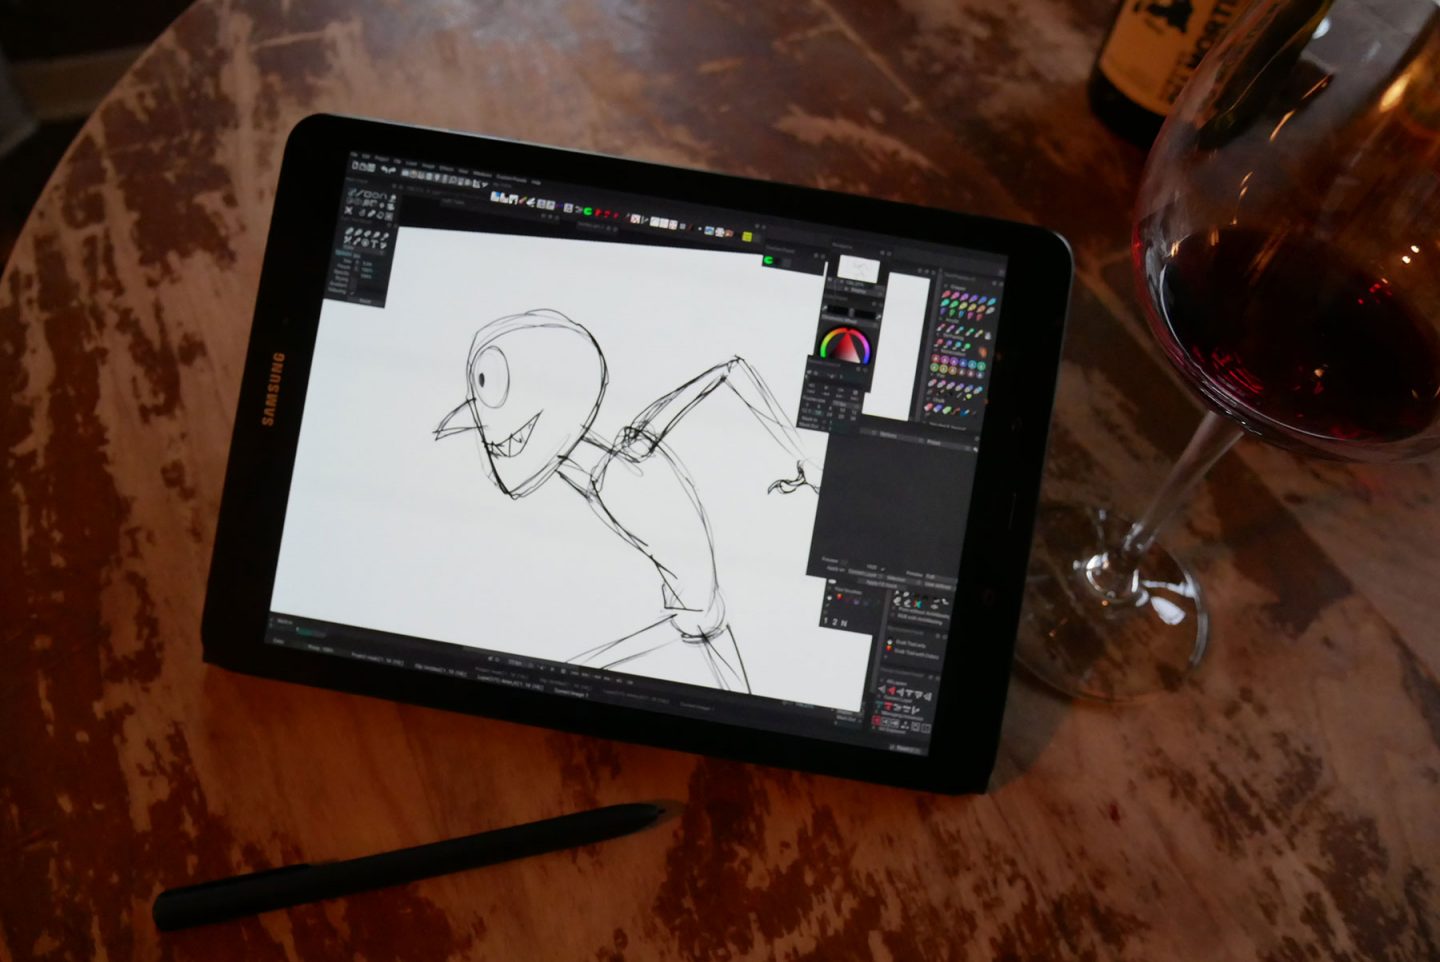 TVPaint is now available for Android users.